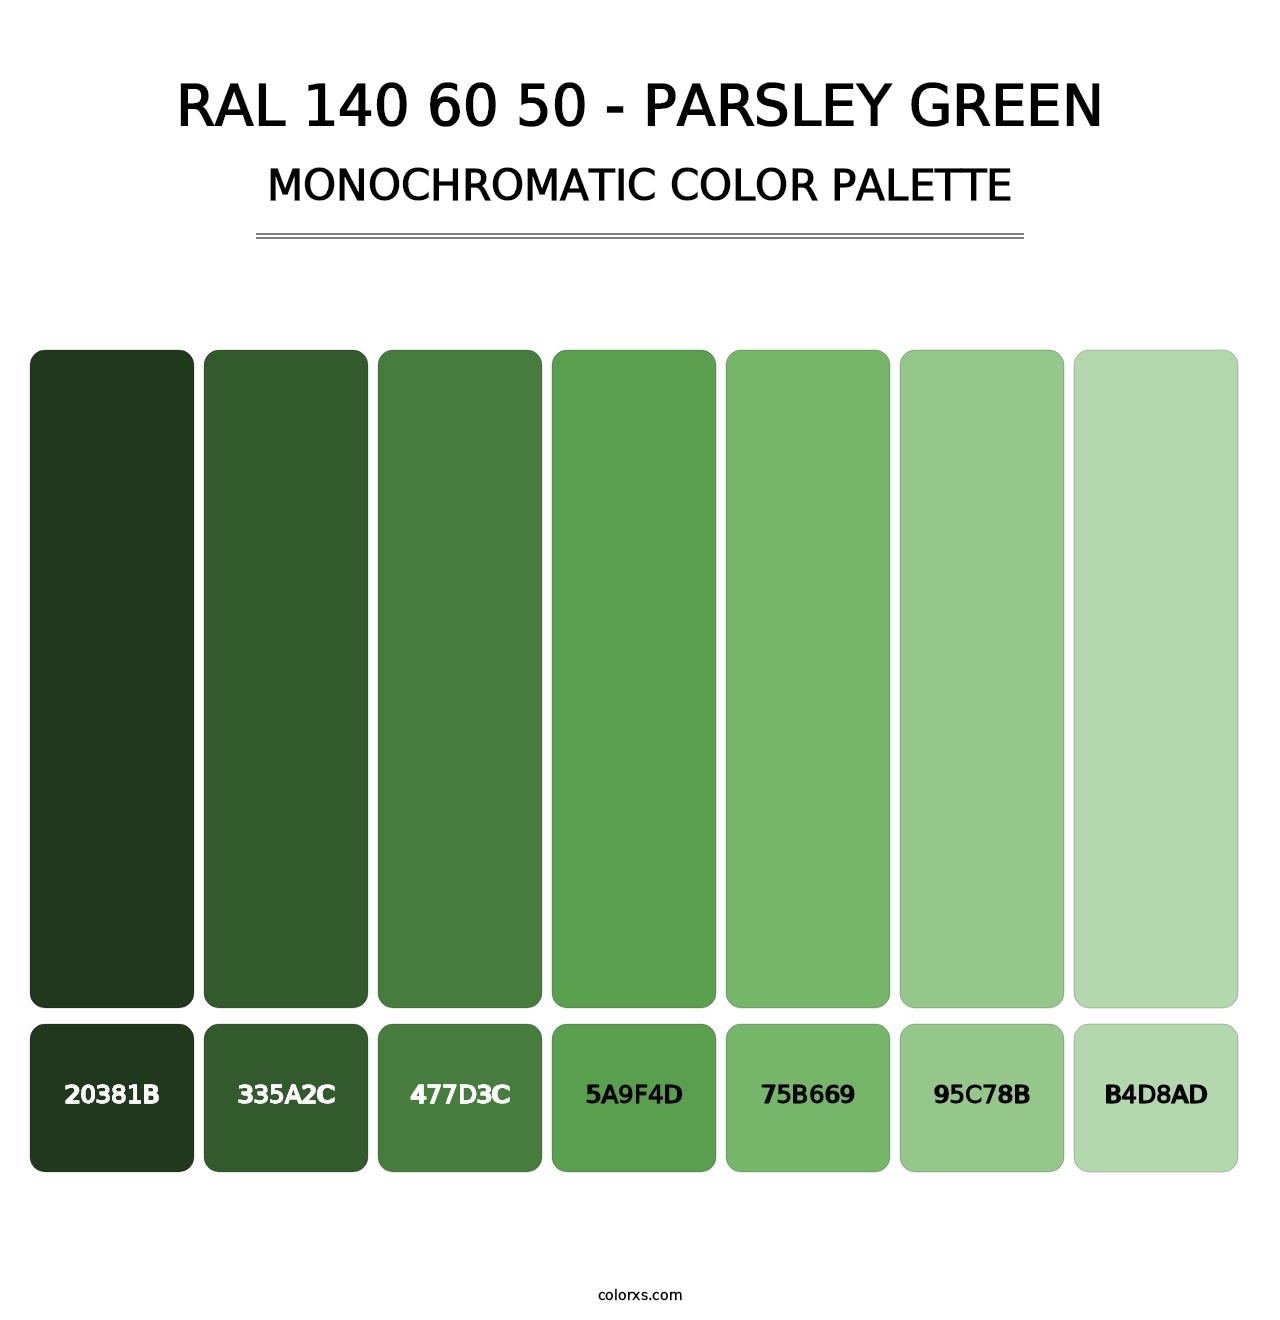 RAL 140 60 50 - Parsley Green - Monochromatic Color Palette